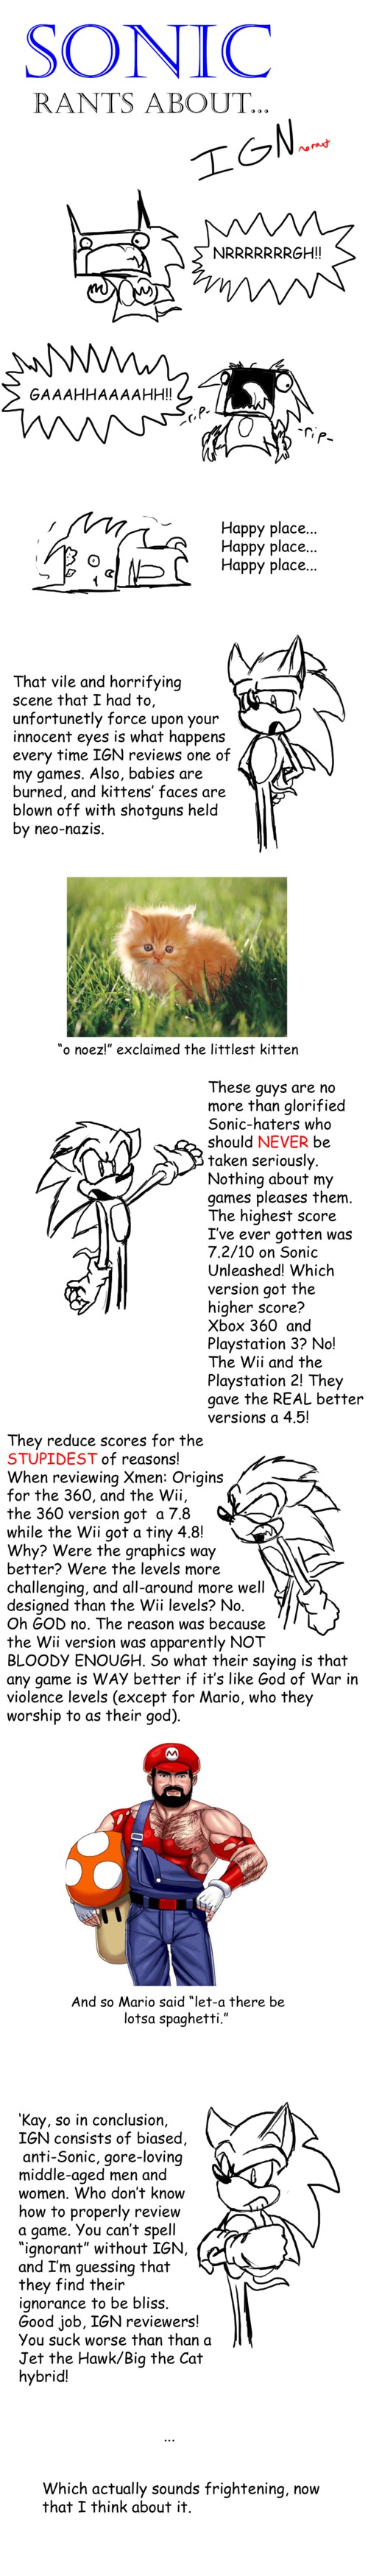 Sonic Rants About... IGN by TheGameArtCritic